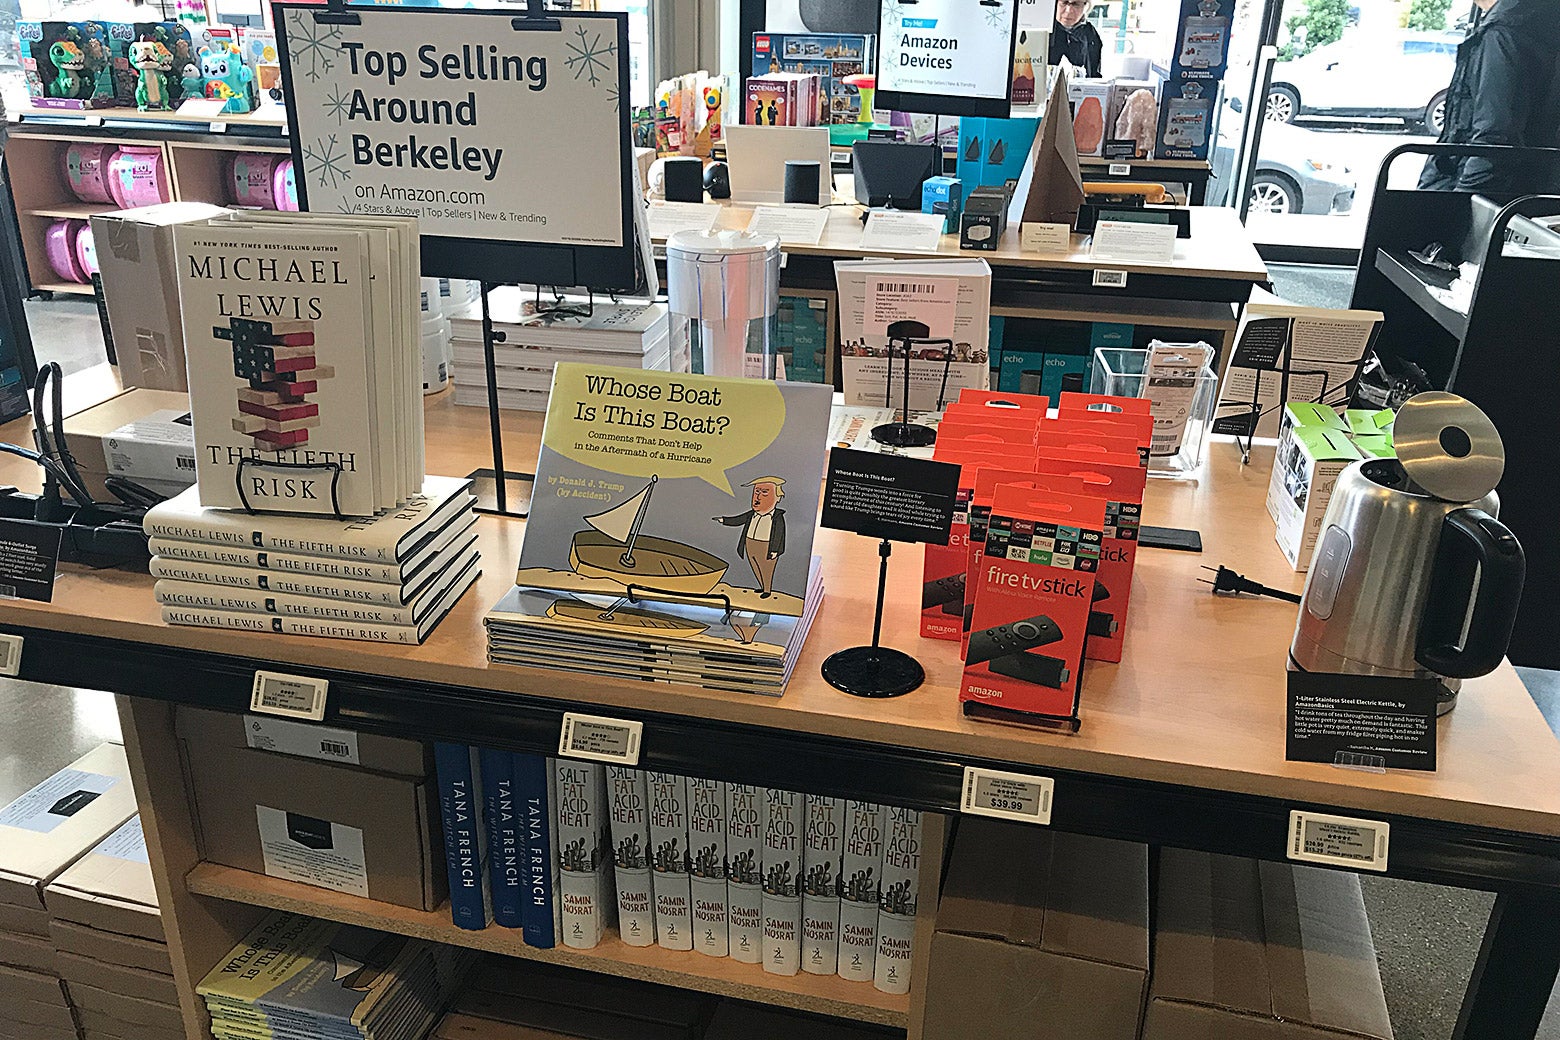 A sign says "Top Selling Around Berkeley" over books by Michael Lewis, a Fire TV Stick, and other items.